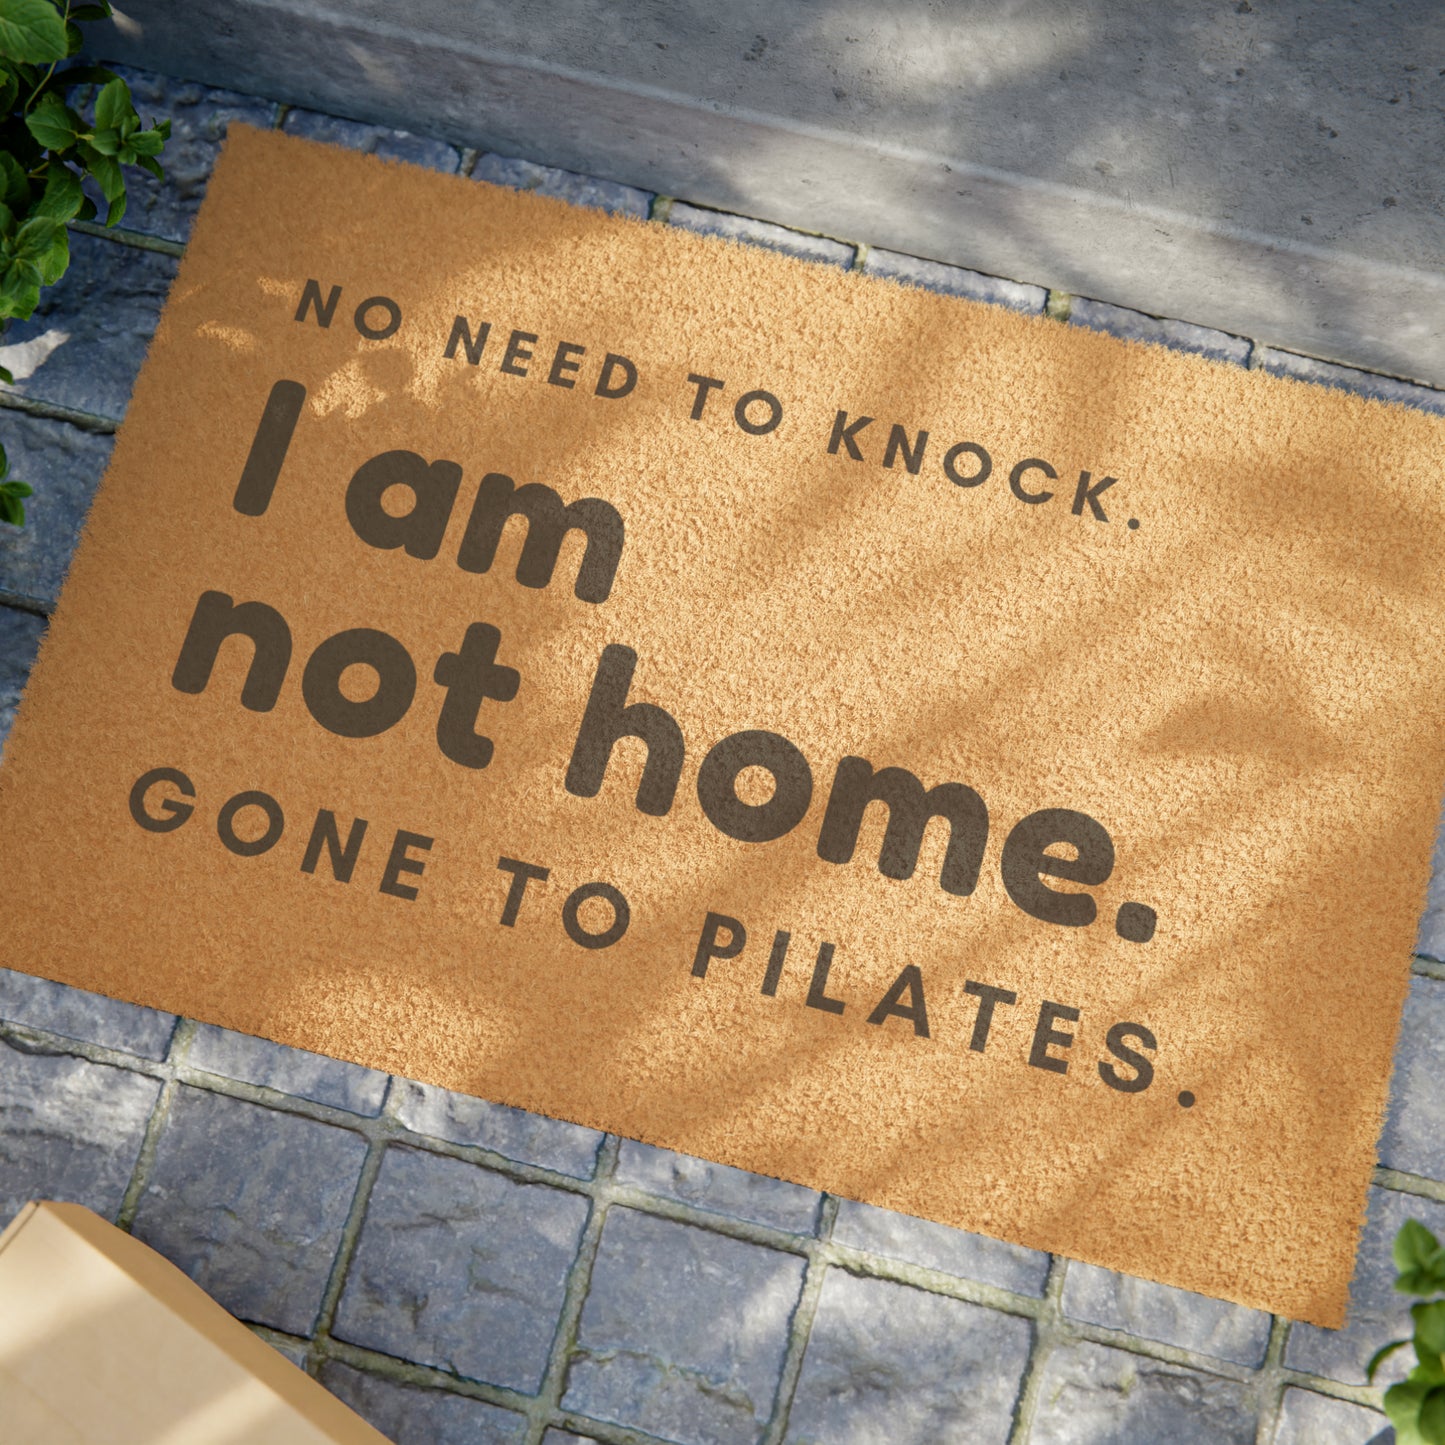 I am not Home - Gone to Pilates Doormat